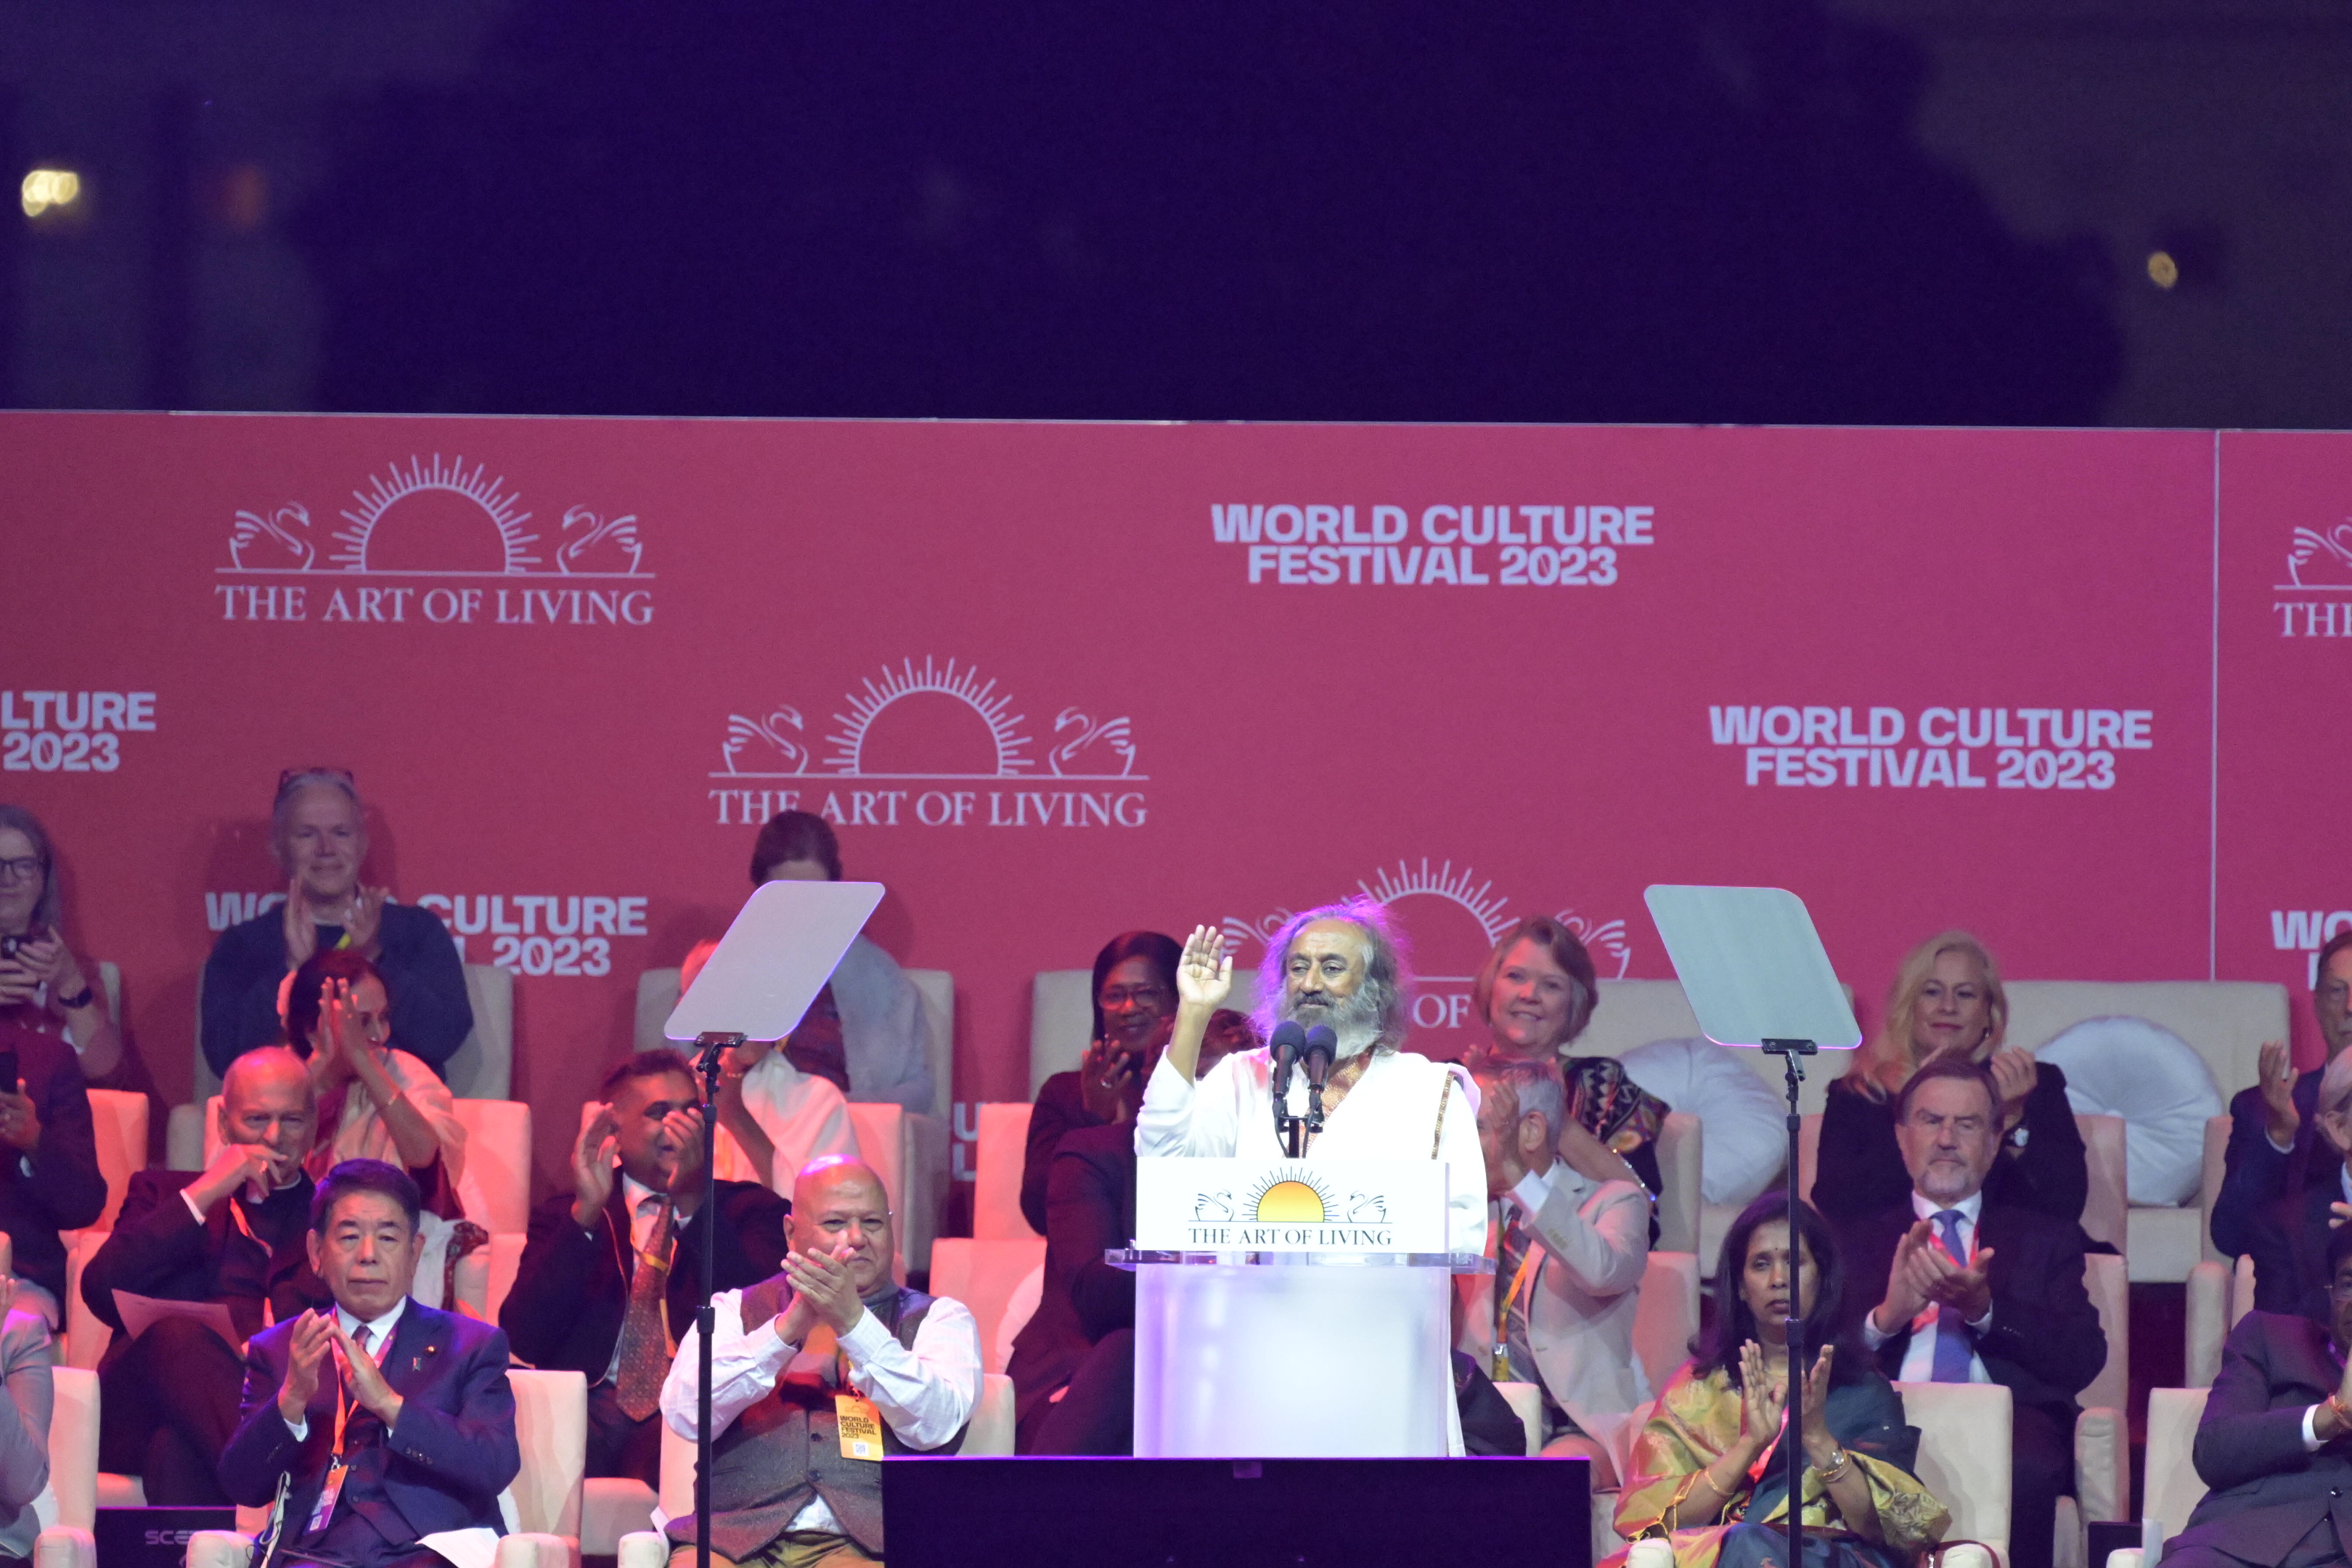 World Culture Festival 2023 - 29th Sept. to 1st Oct. in Washington D.C.